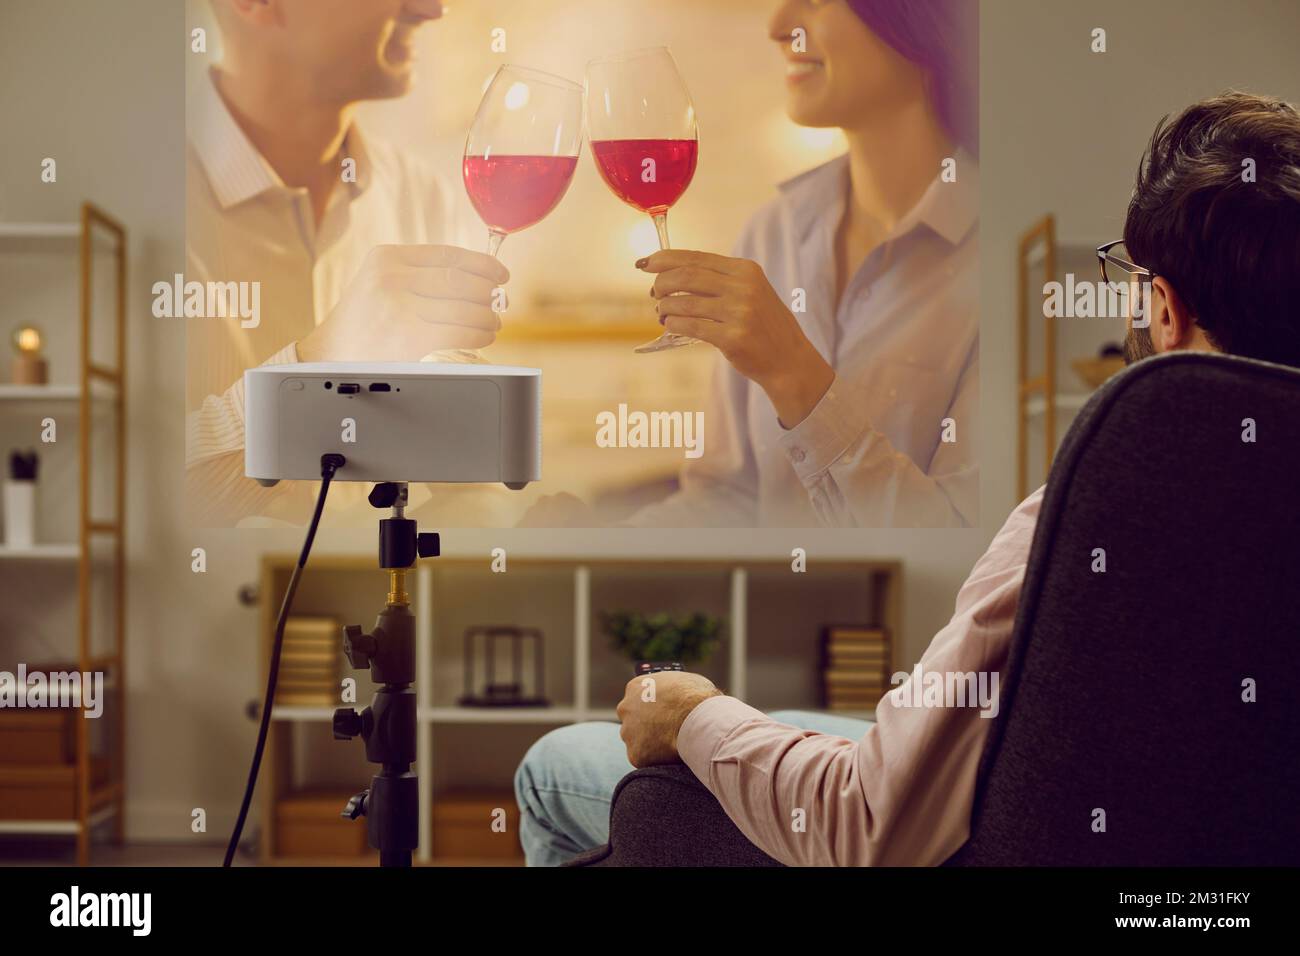 Lonely man is relaxing at home in evening watching romantic movie on TV projector. Stock Photo